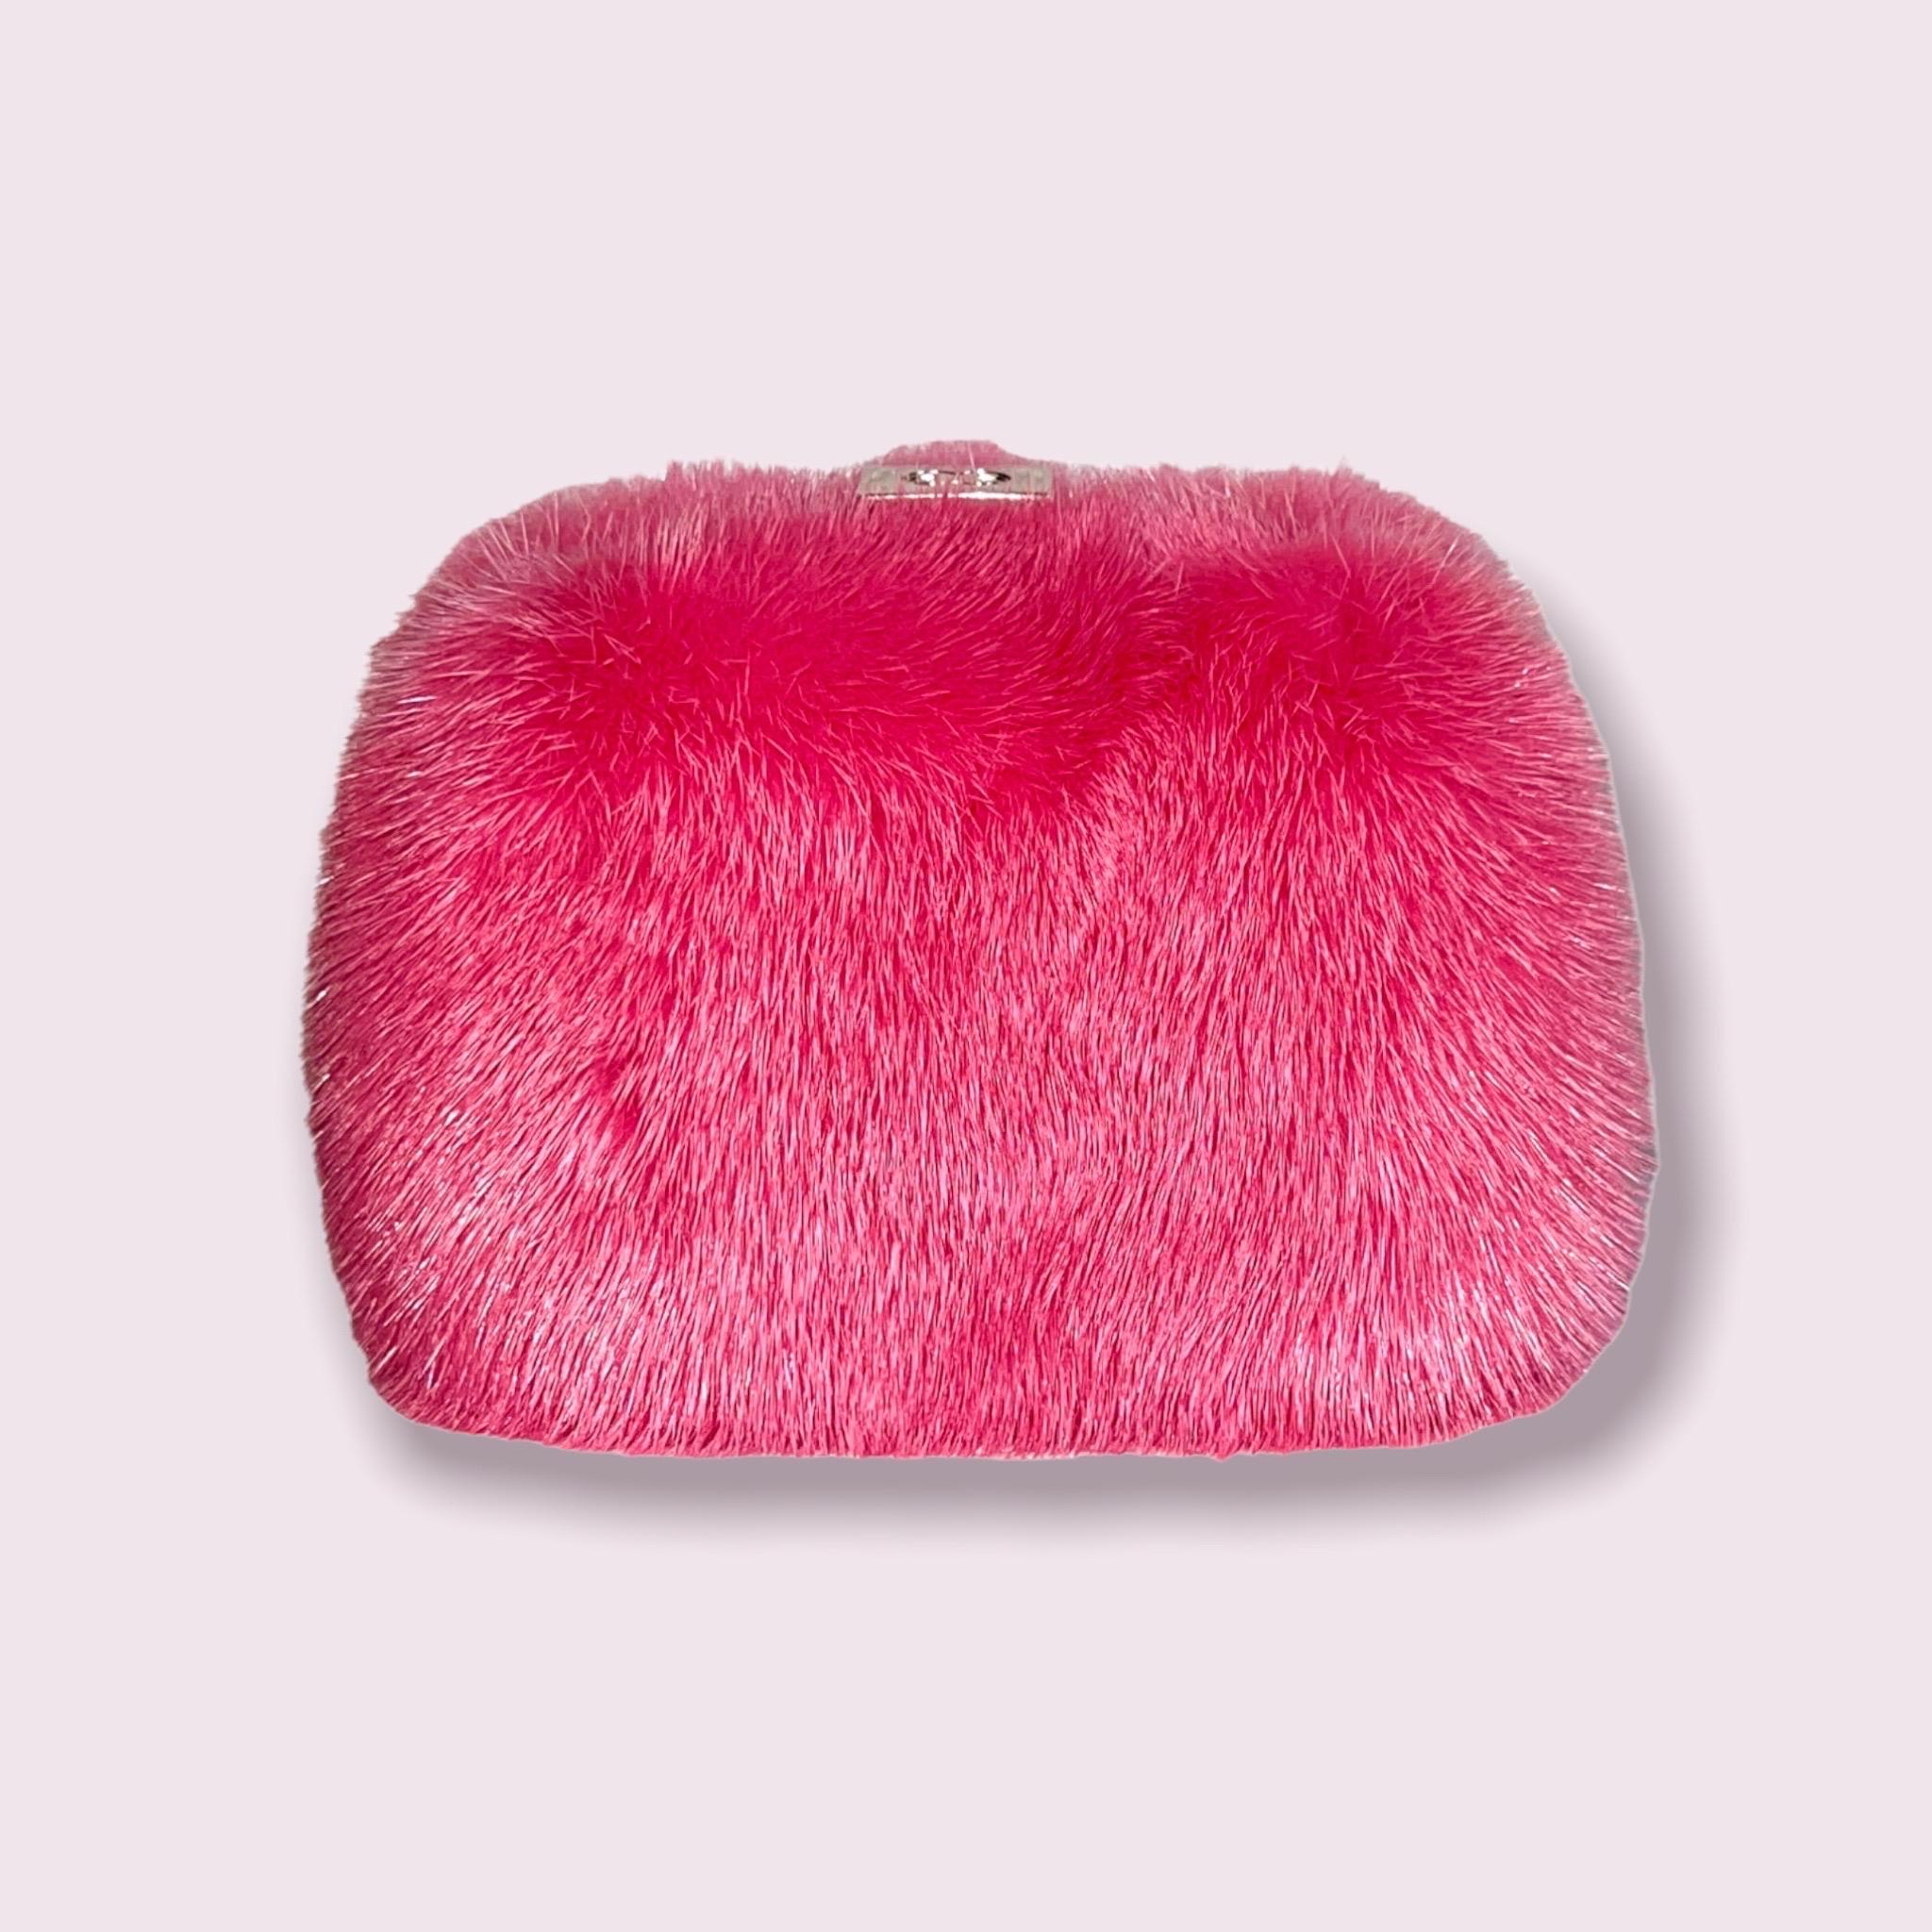 what are the largest pink vessels in your mink